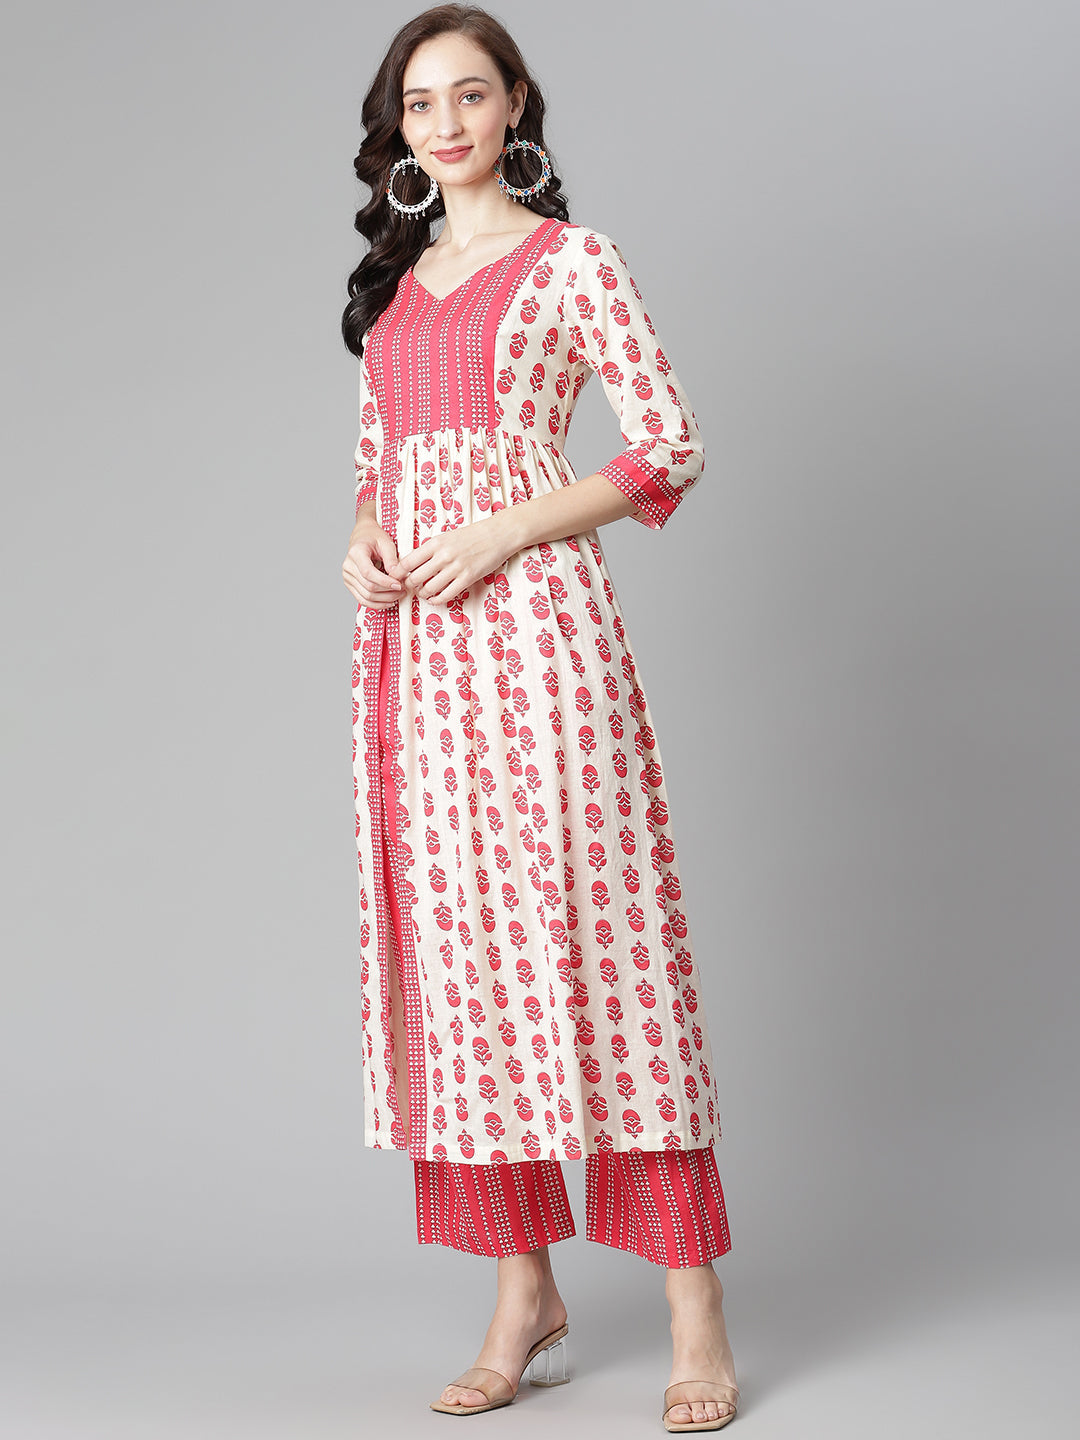 Women's Off-White-Red Cotton Printed Front Slit A-Line Kurta With Palazzo - Noz2Toz